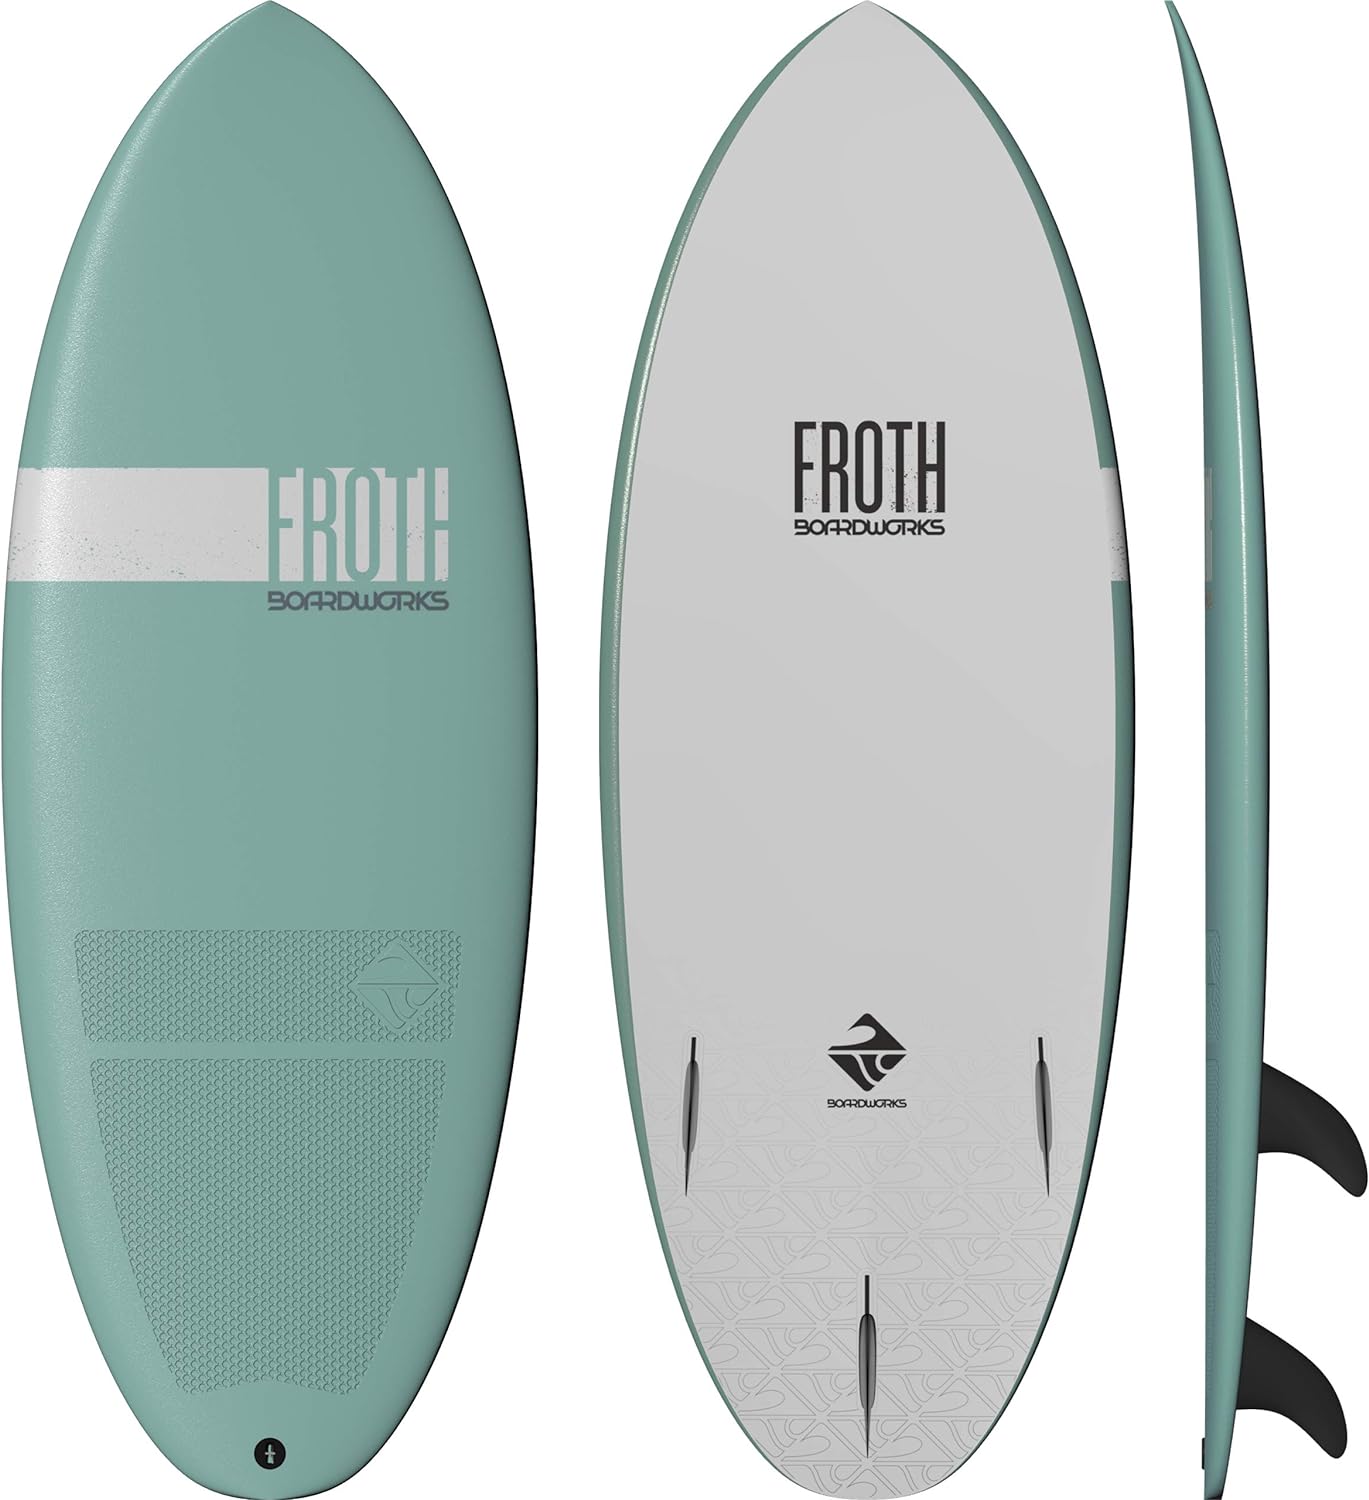 A Froth! Surf Board by Boardworks with green and white waves design.